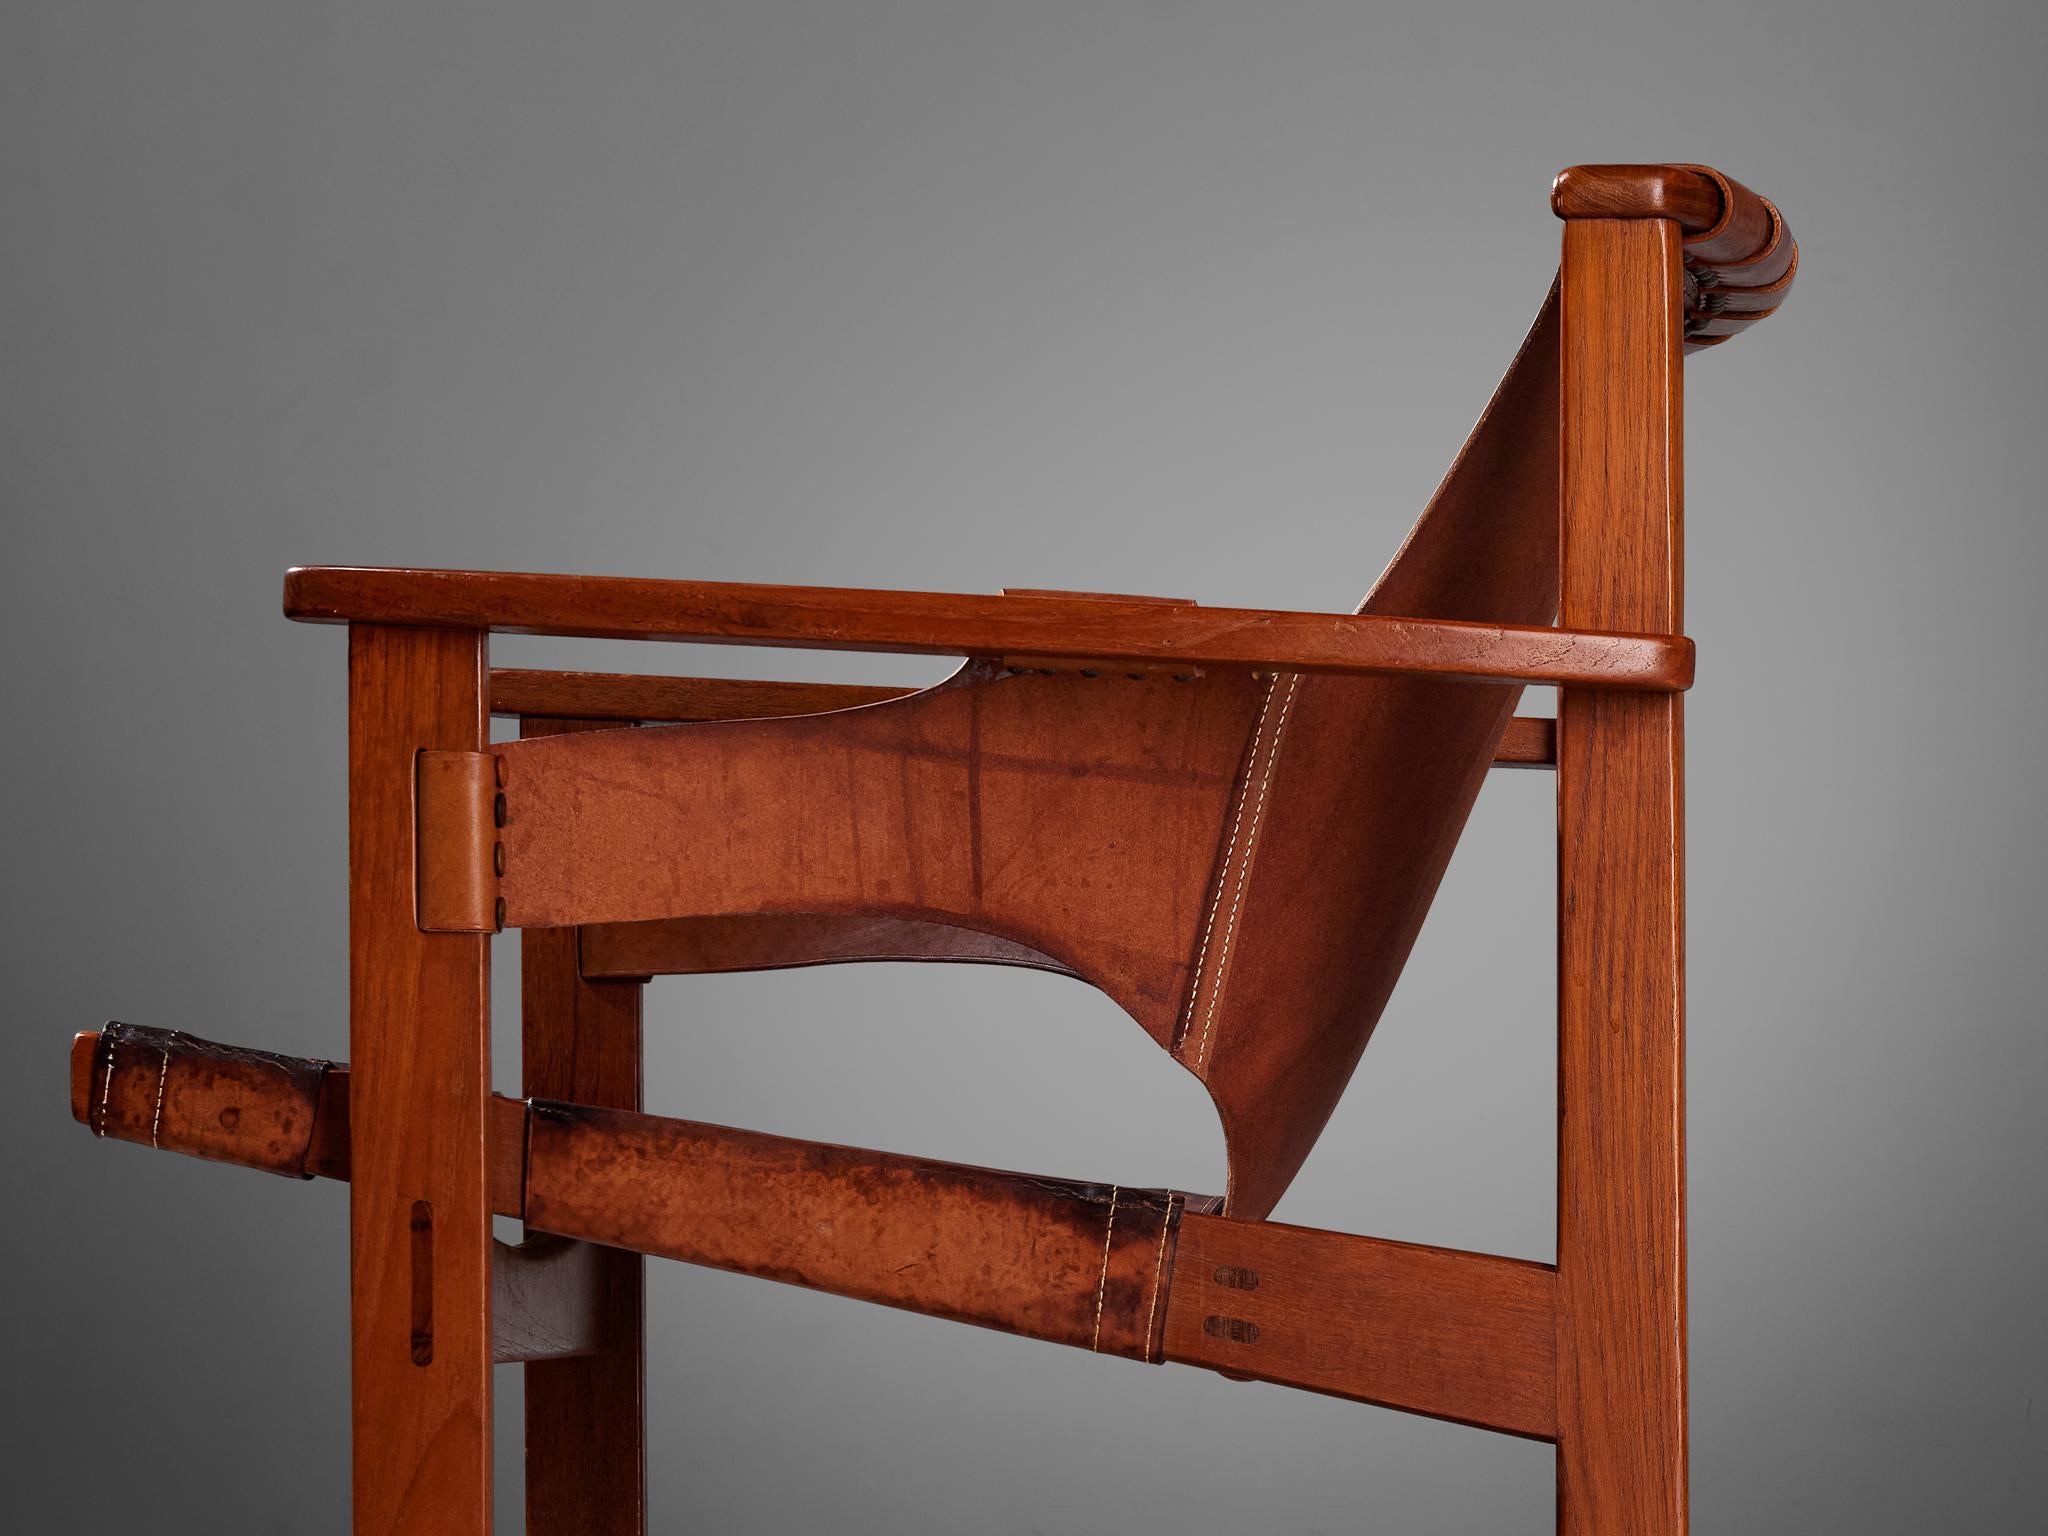 Carl-Axel Acking ‘Trienna’ Lounge Chair in Oak and Patinated Leather